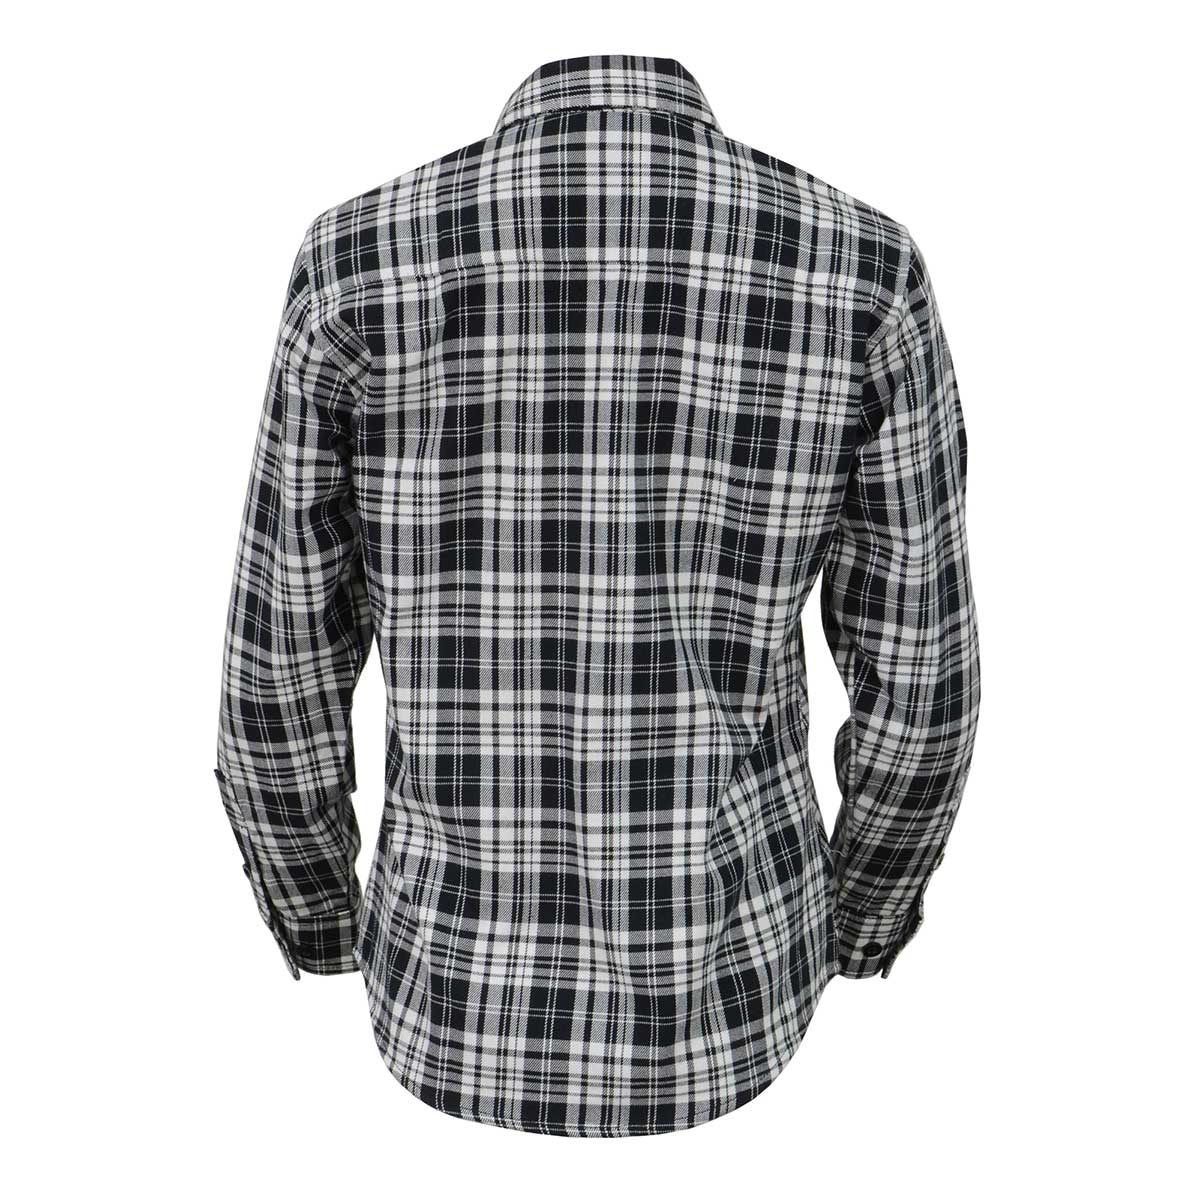 Milwaukee Leather MNG21615 Women's Black and White Long Sleeve Cotton Flannel Shirt